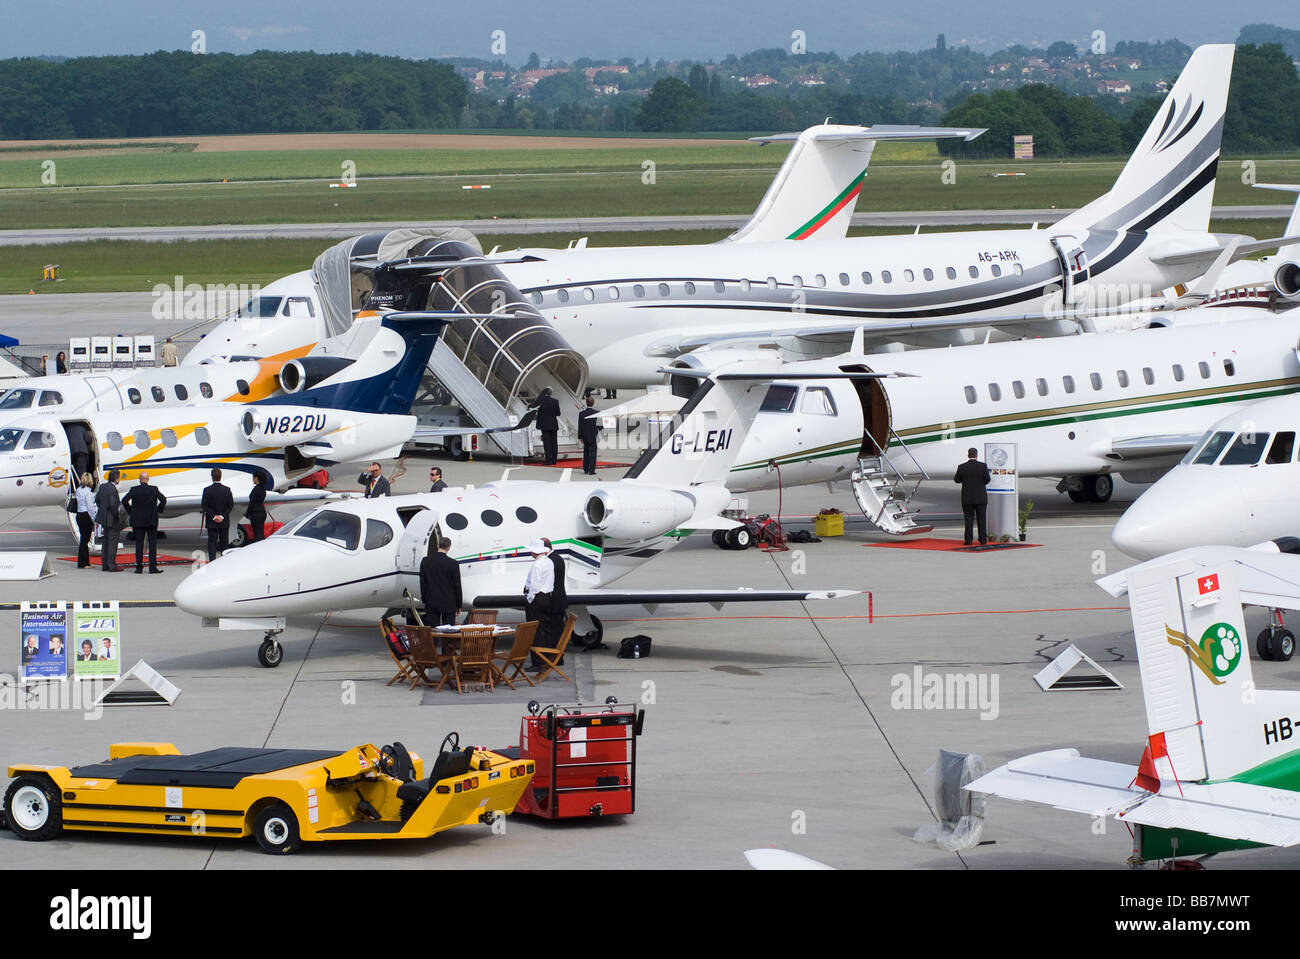 Executive Business Jets on Display at EBACE Aircraft Trade Show at Geneva Airport Switzerland Geneve Suisse Stock Photo